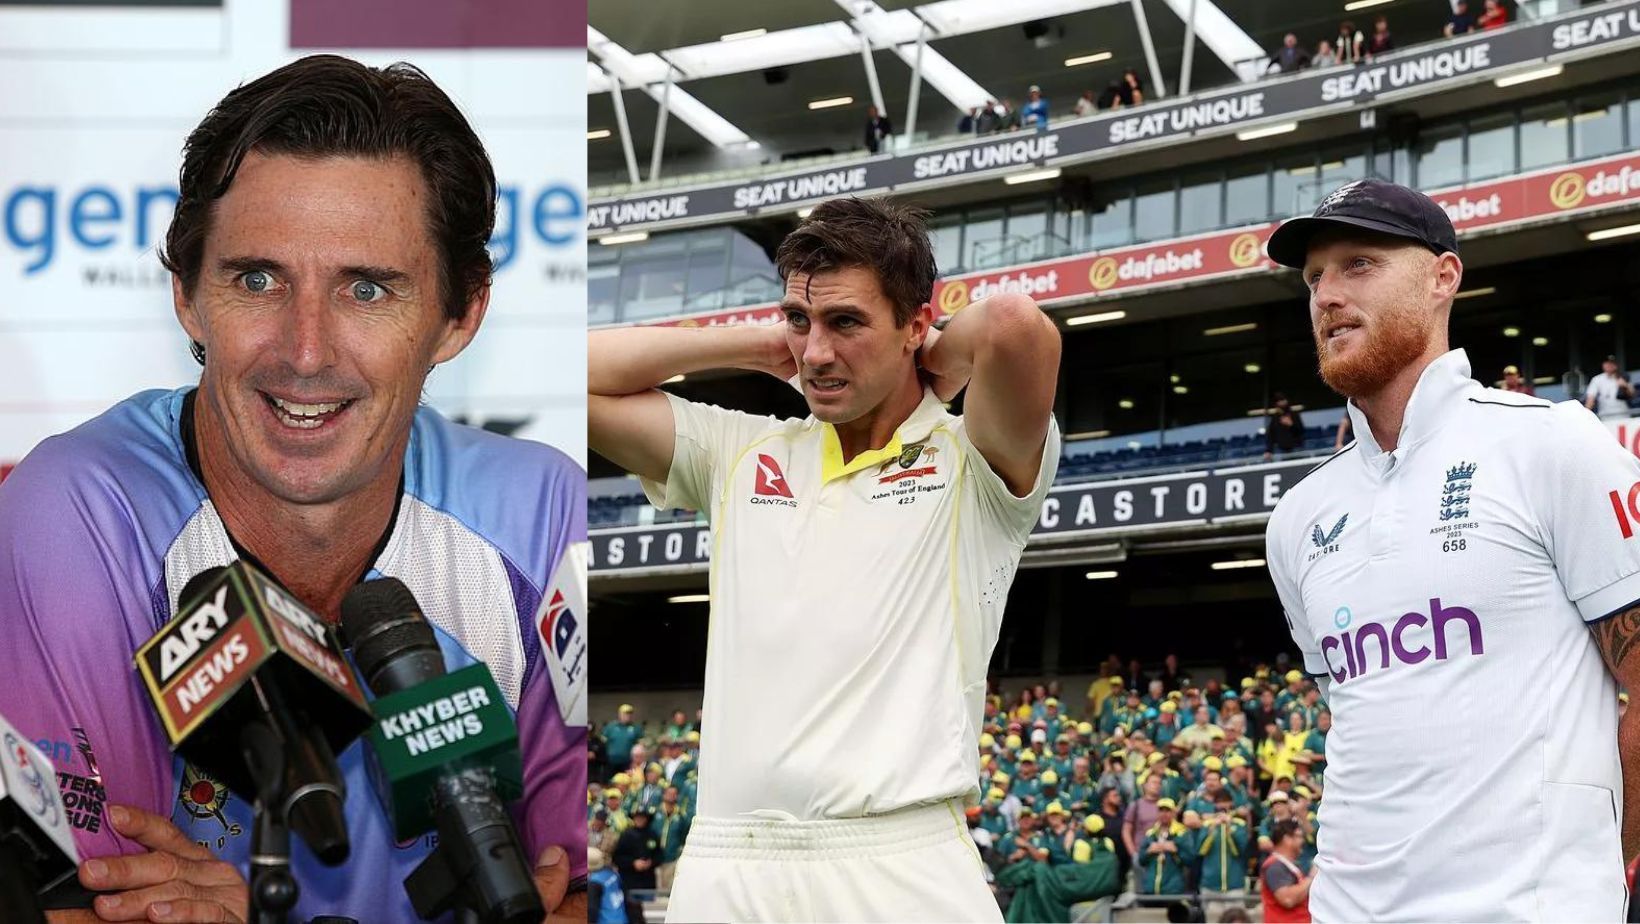 Brad Hogg asks umpires to be &quot;ruthless&quot;.